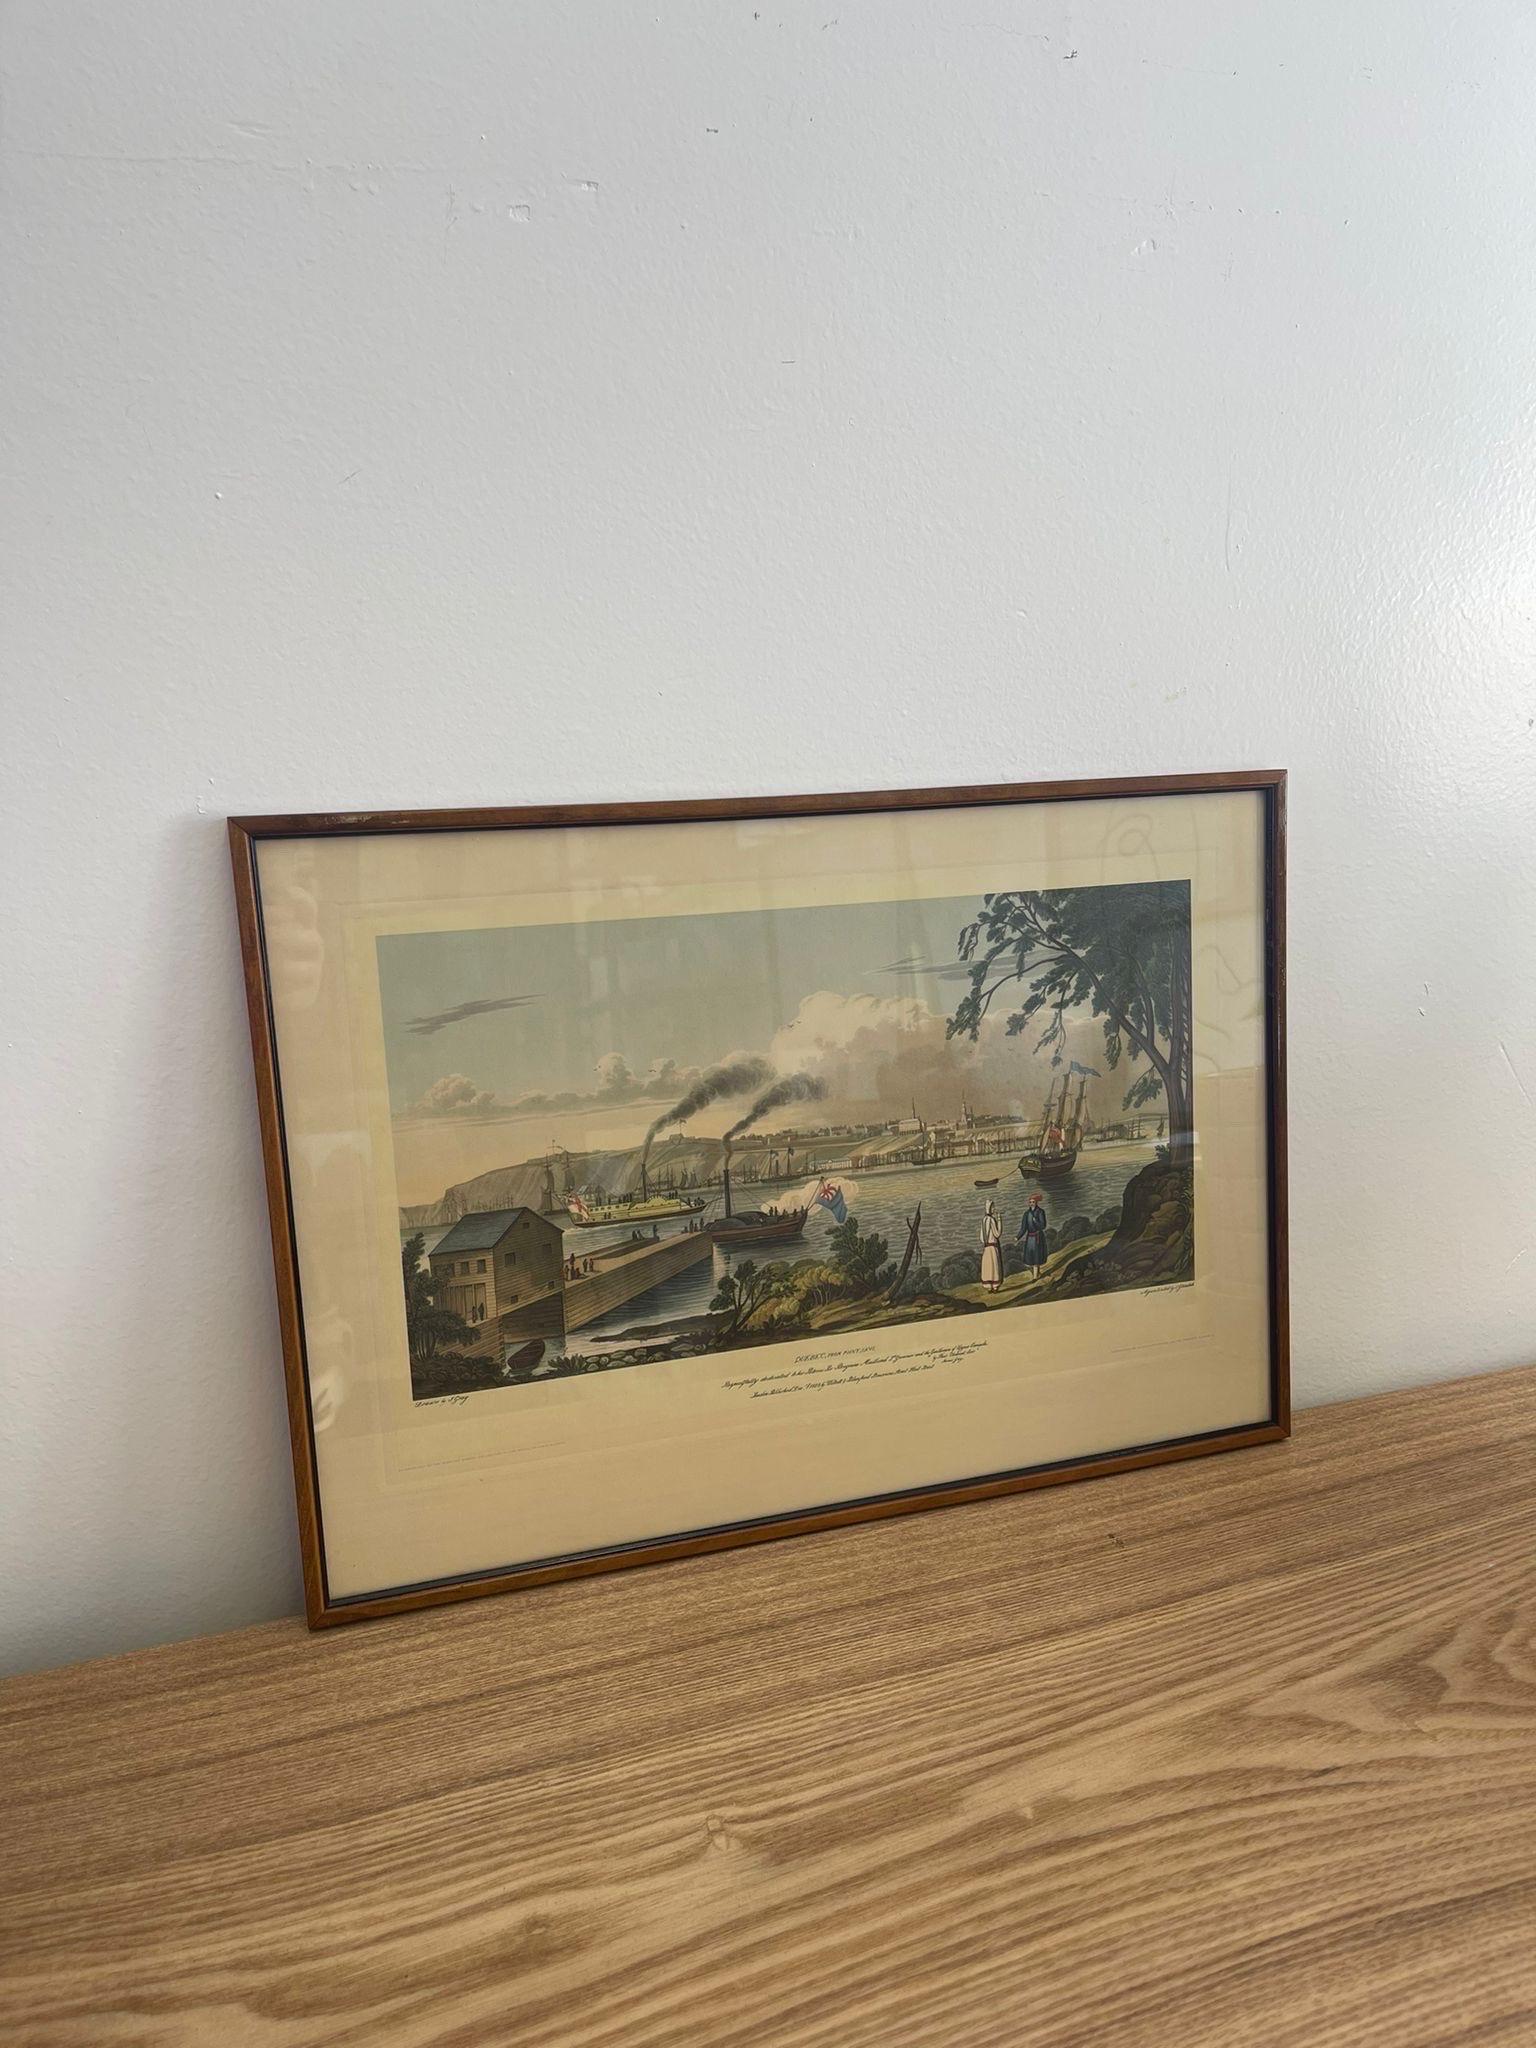 Dedication and information about this print are included at the bottom of the frame. Two similar Artwork are available through separate listings. Vintage Condition Consistent with Age as Pictured.

Dimensions. 19 W ; 1/2 D ; 13 1/2 H